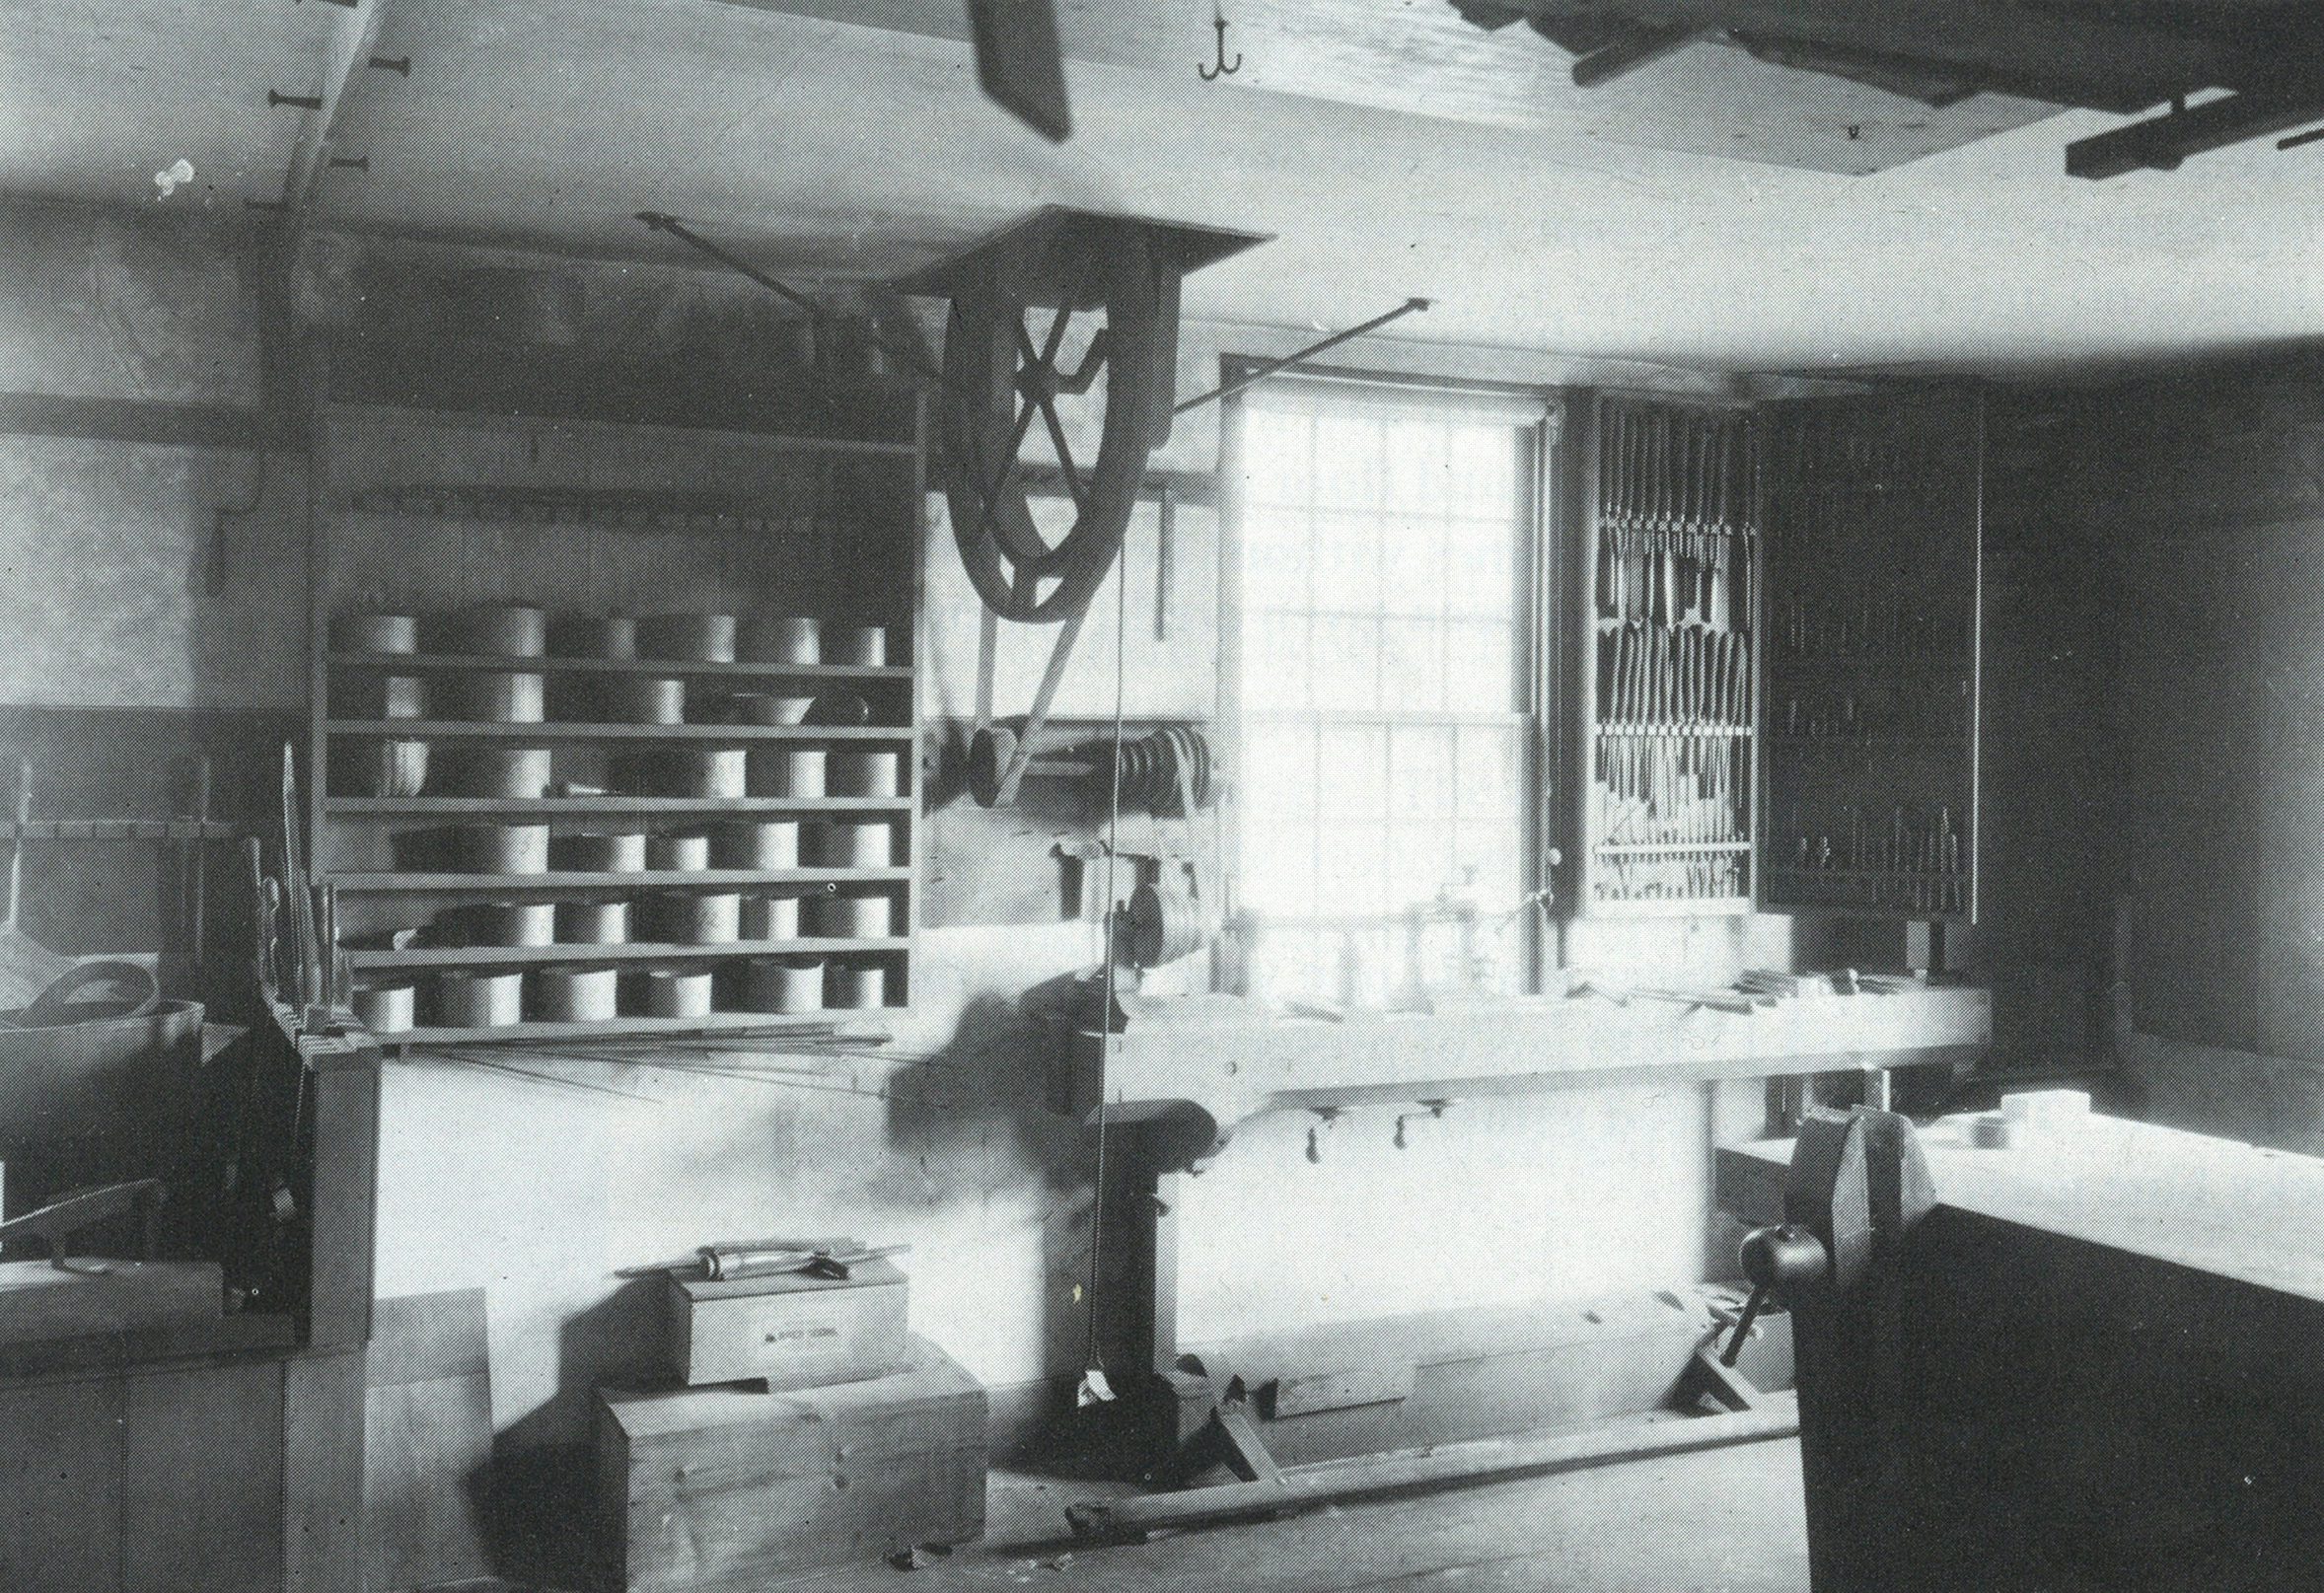 Brethren’s workshop at Mount Lebanon, where Brothers Amos Biscy and Henry Bennett invented the tongue and groove machine in 1828. Shakers worked in silence, constantly learning new trades and encouraged to find ways of doing tasks that would decrease human toil so more time could be dedicated to dance and prayer.